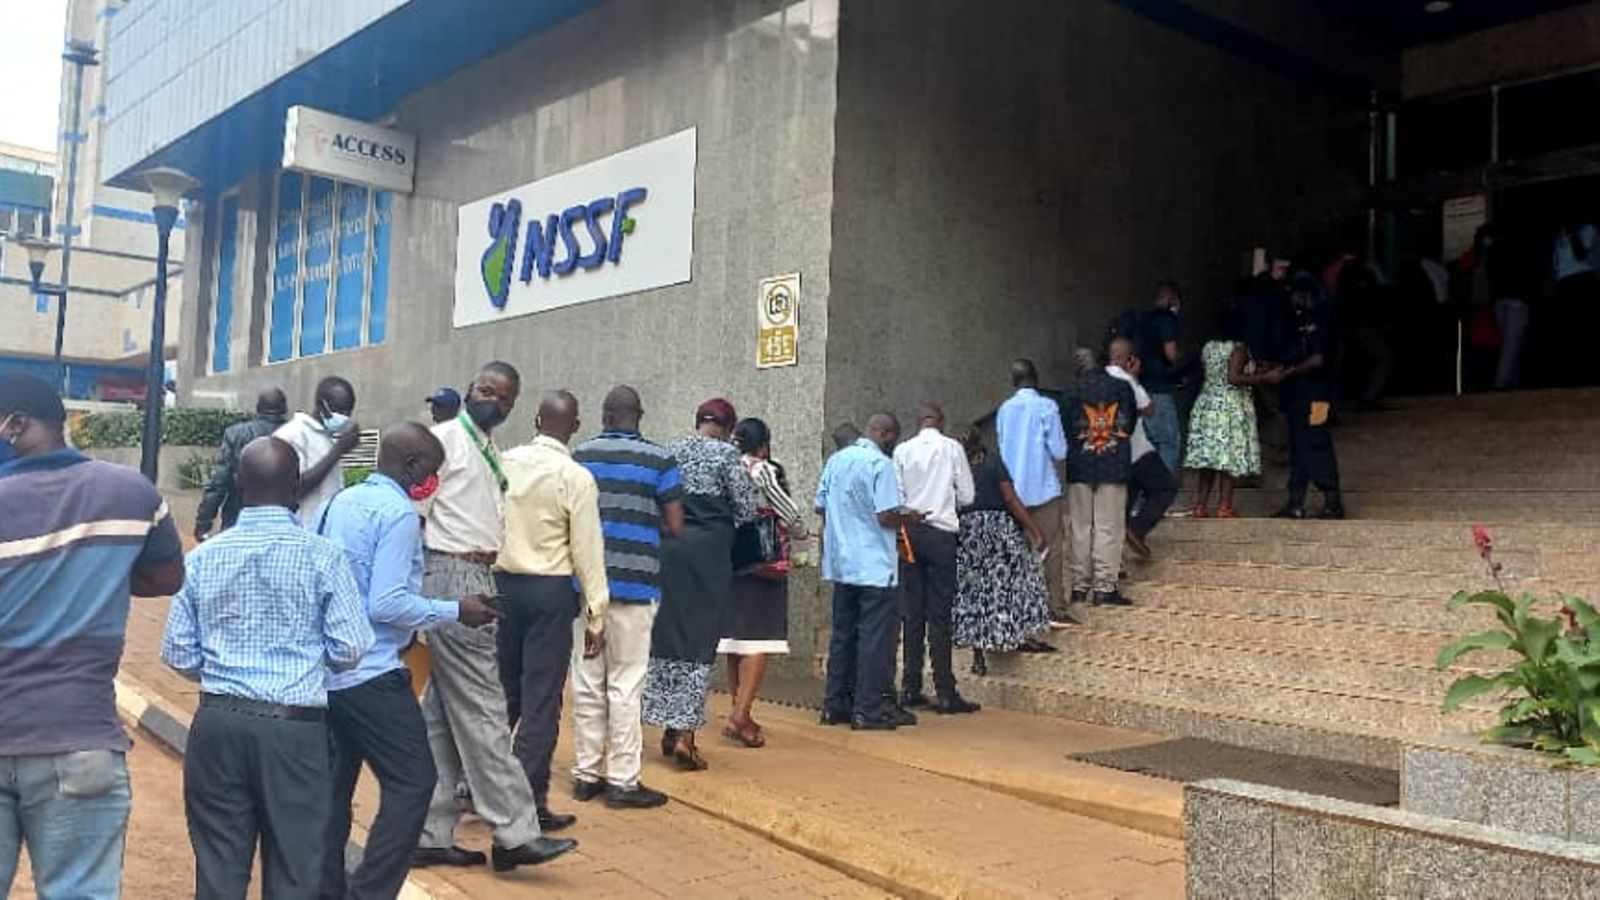 NSSF Releases Statement On Media Reports About Fund Operations